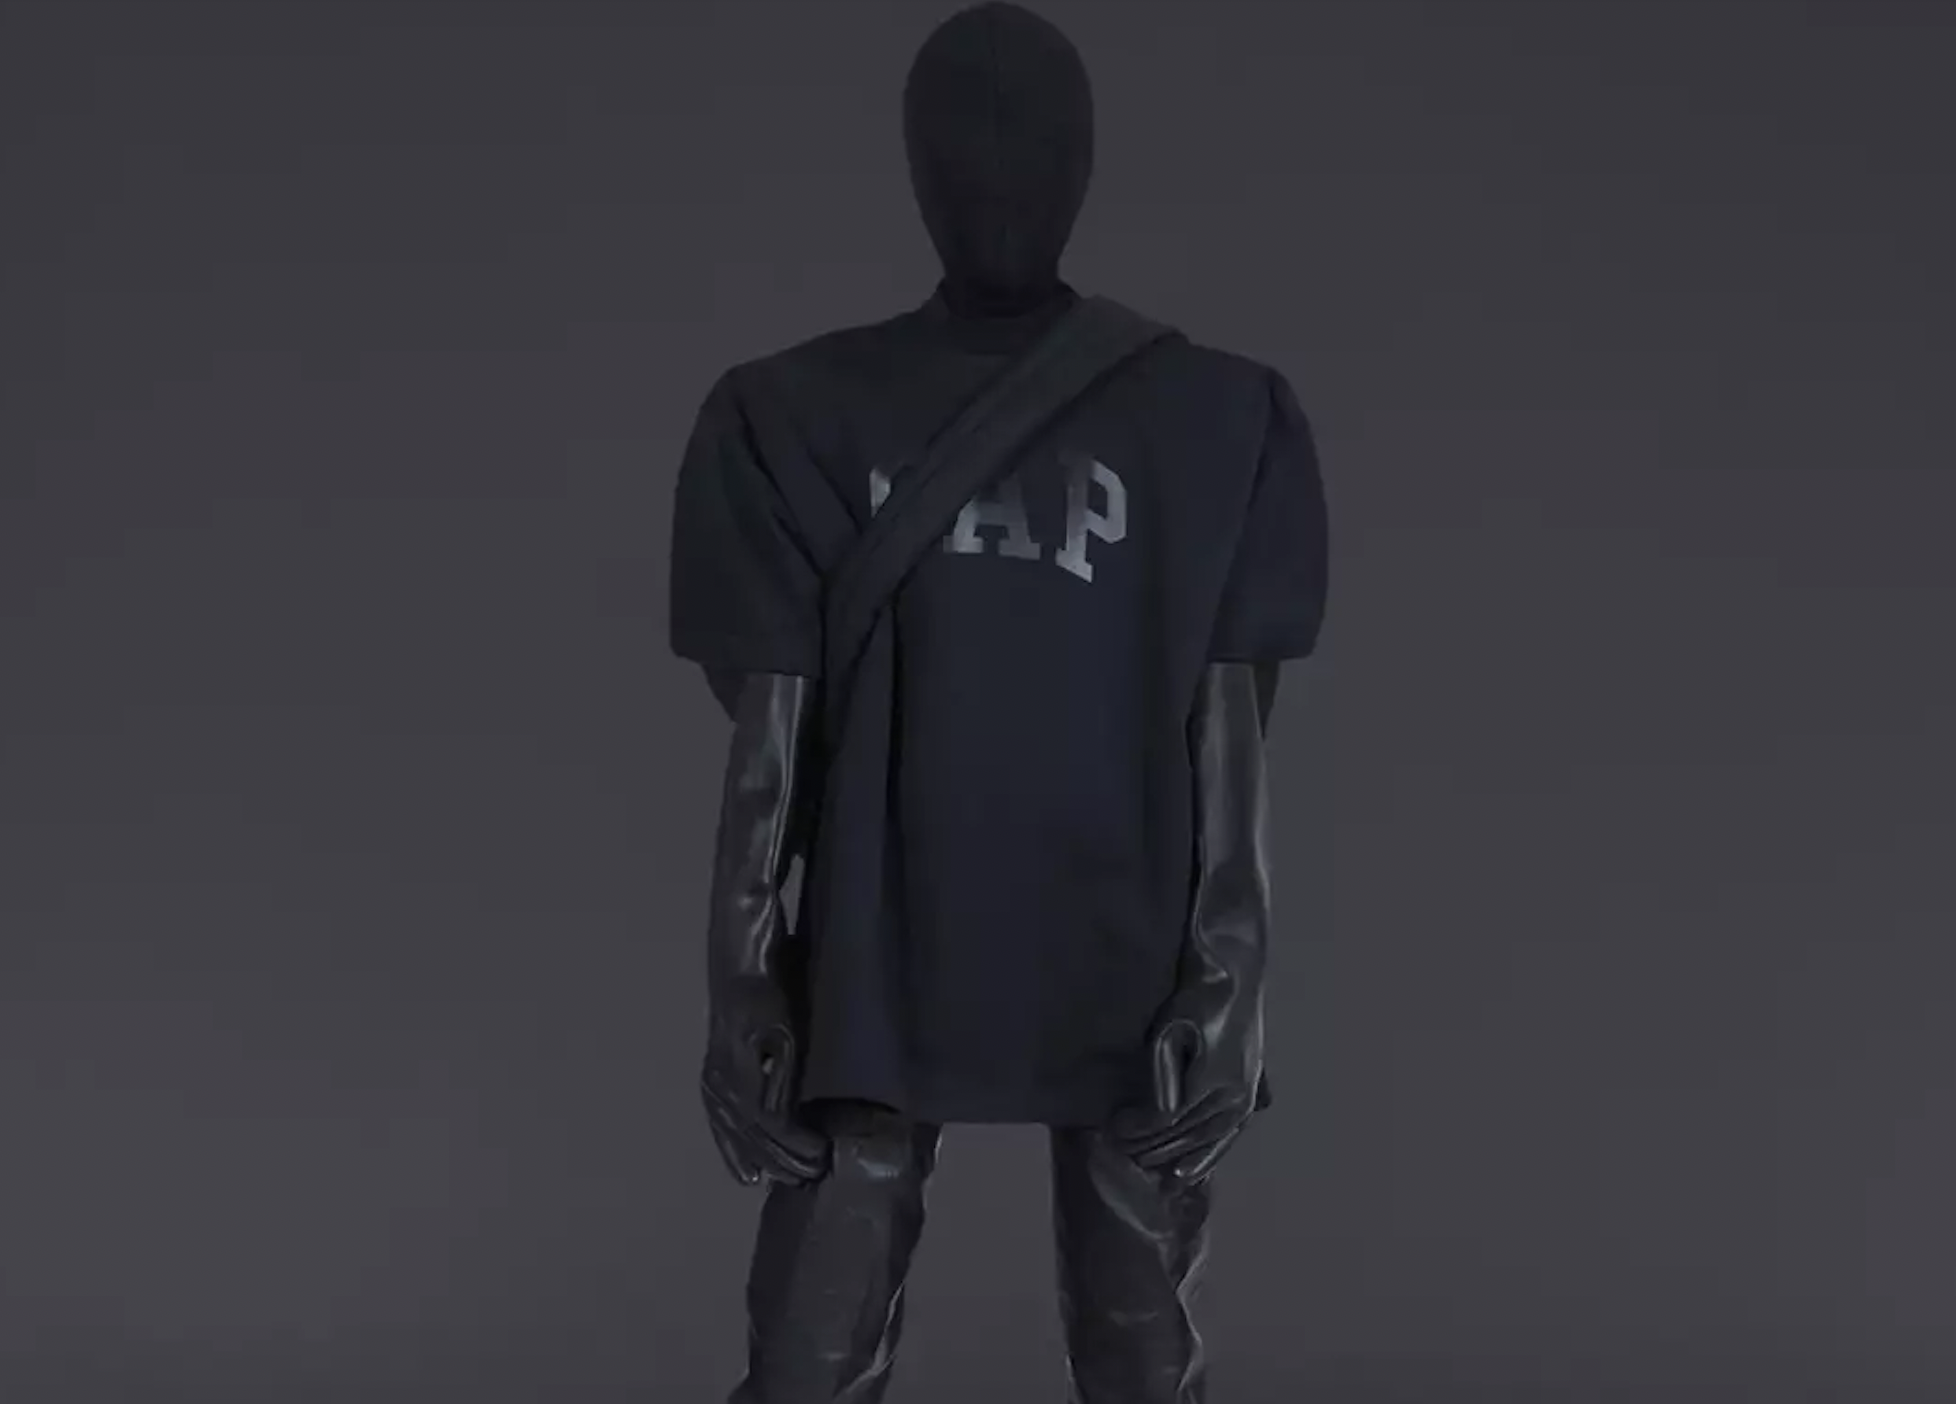 Yeezy Gap Balenciaga: why this might just be the biggest collaboration of  2022